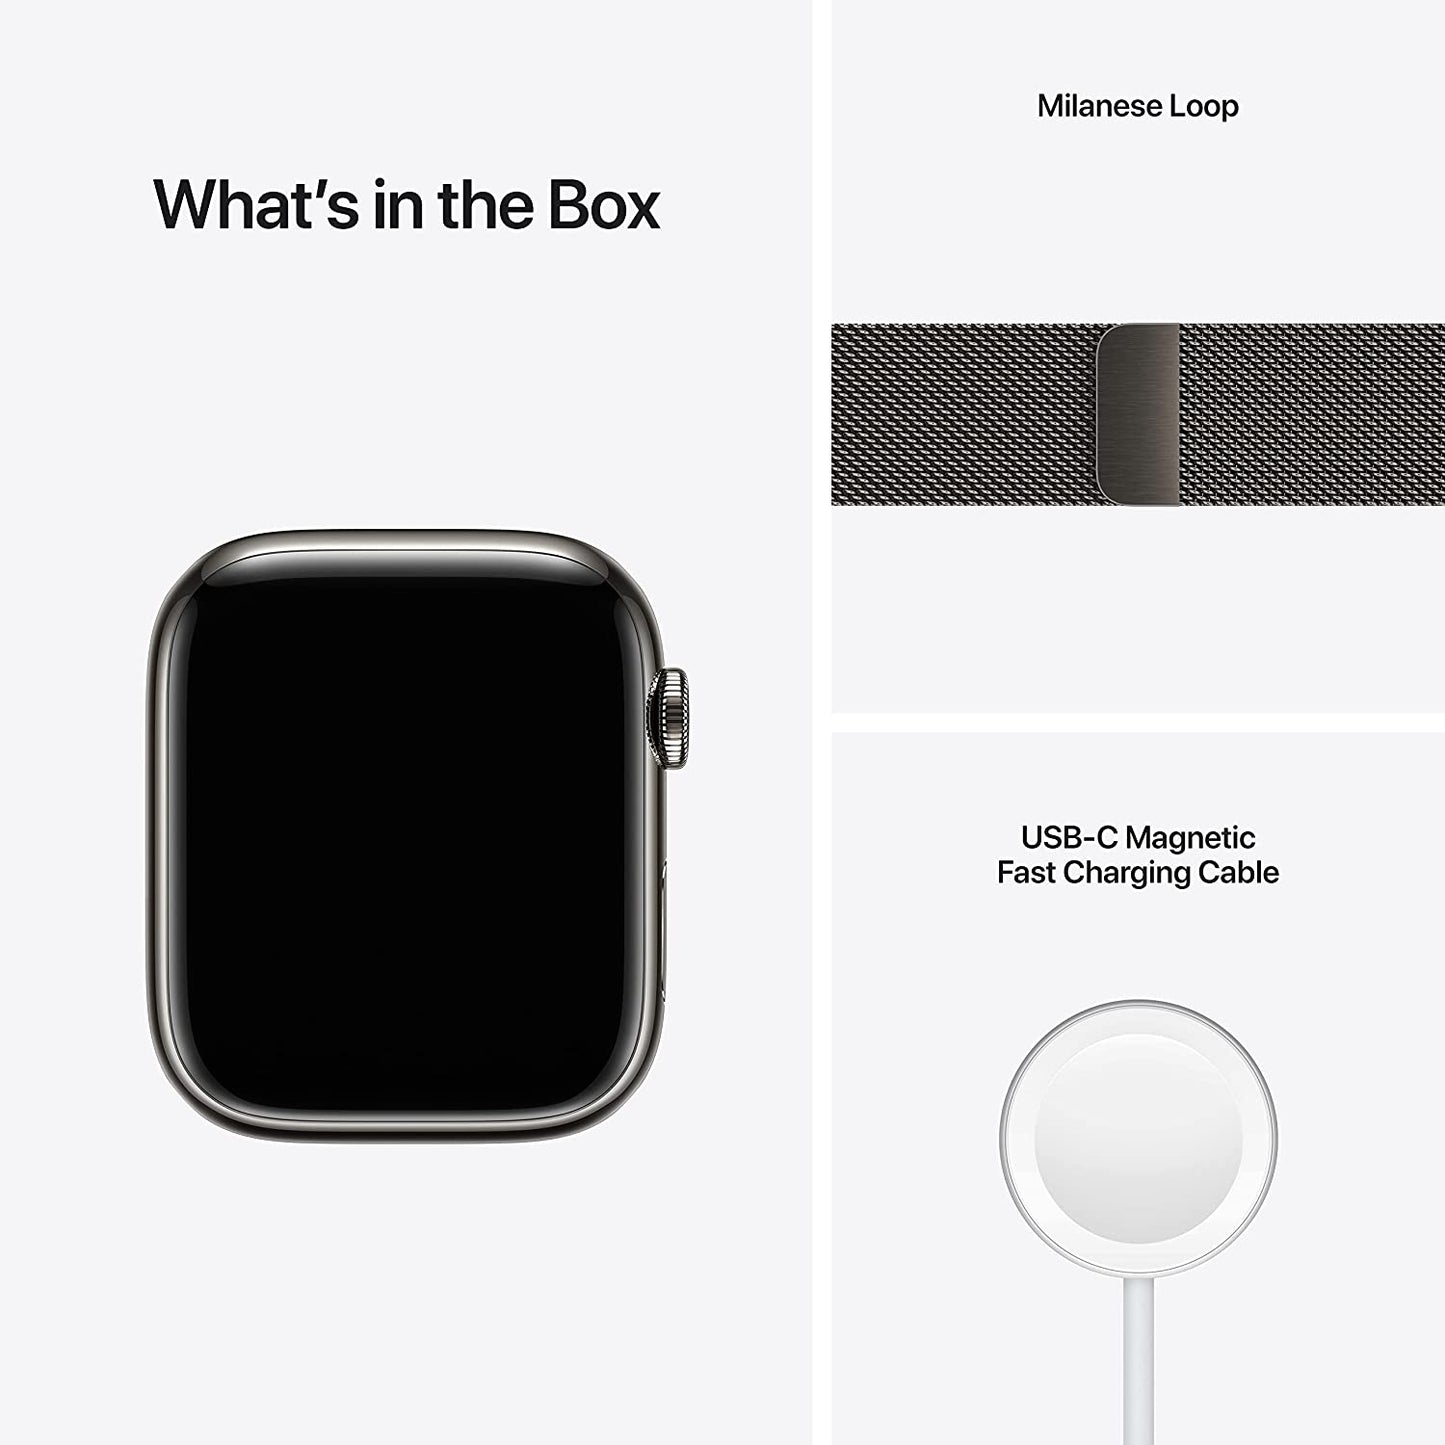 (Open Box) Apple Watch Series 7 GPS + Cellular, 41mm Graphite Stainless Steel Case with Graphite Milanese Loop